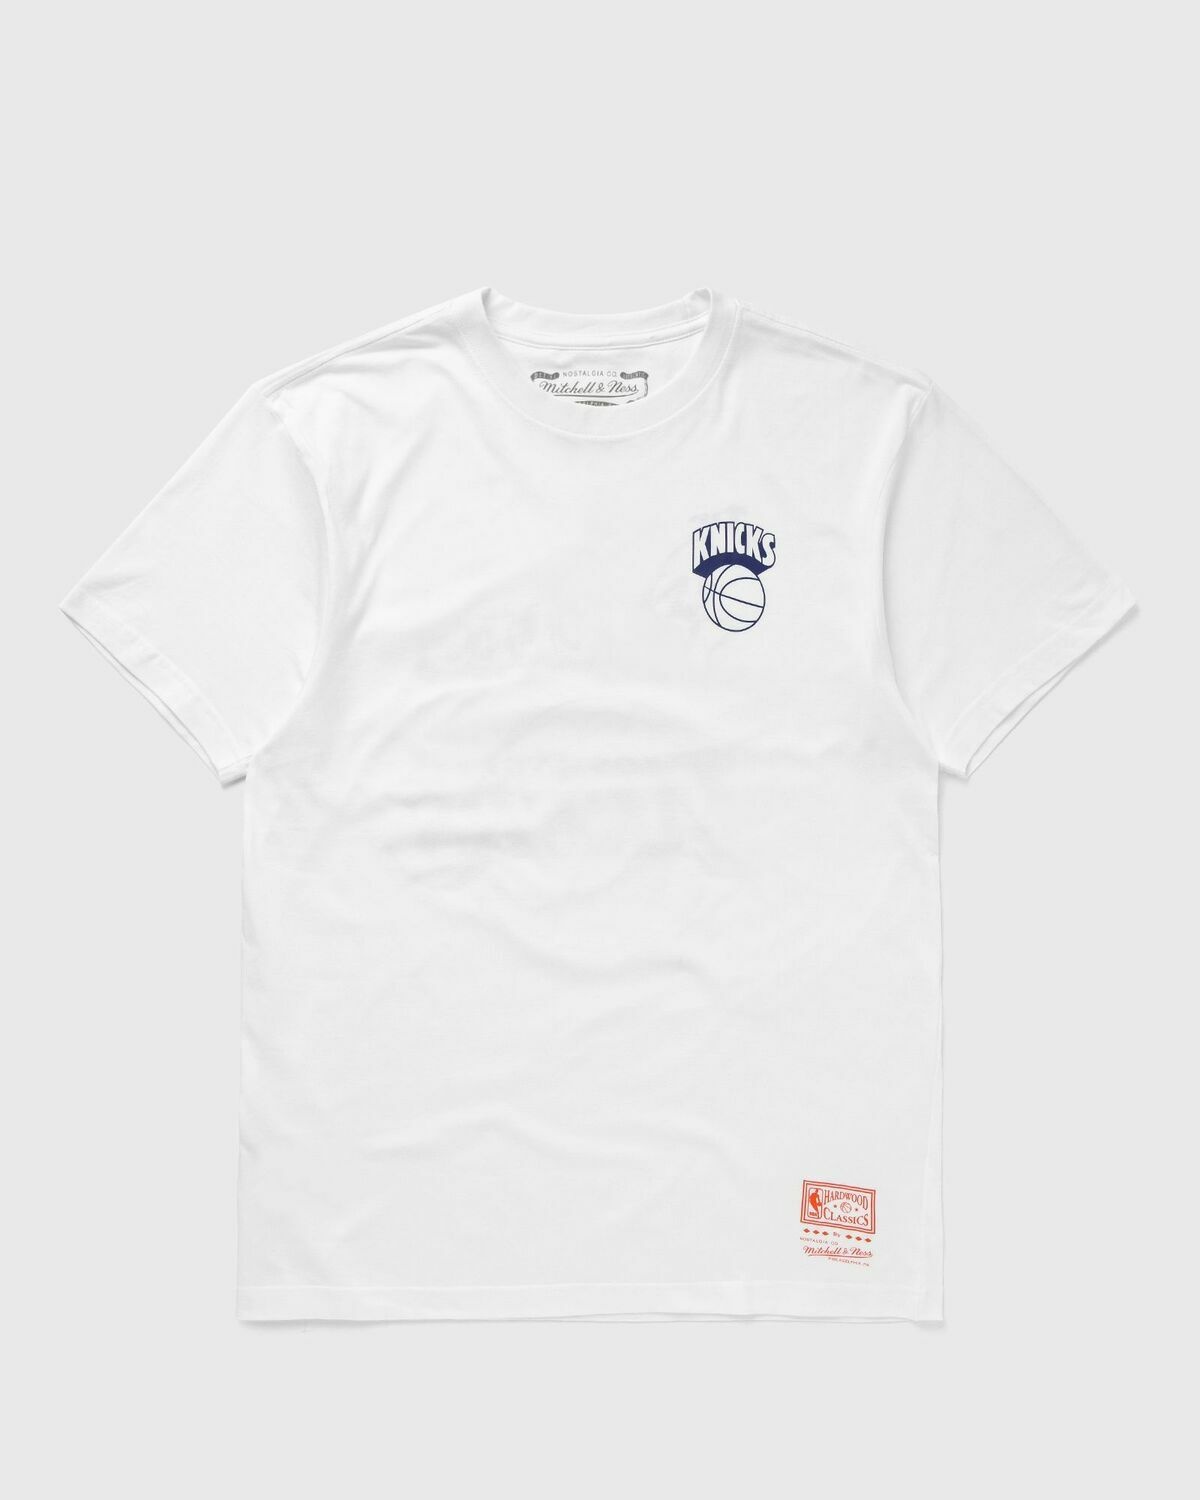 Mitchell & Ness Nba Merch Take Out Tee Knicks White - Mens - Shortsleeves